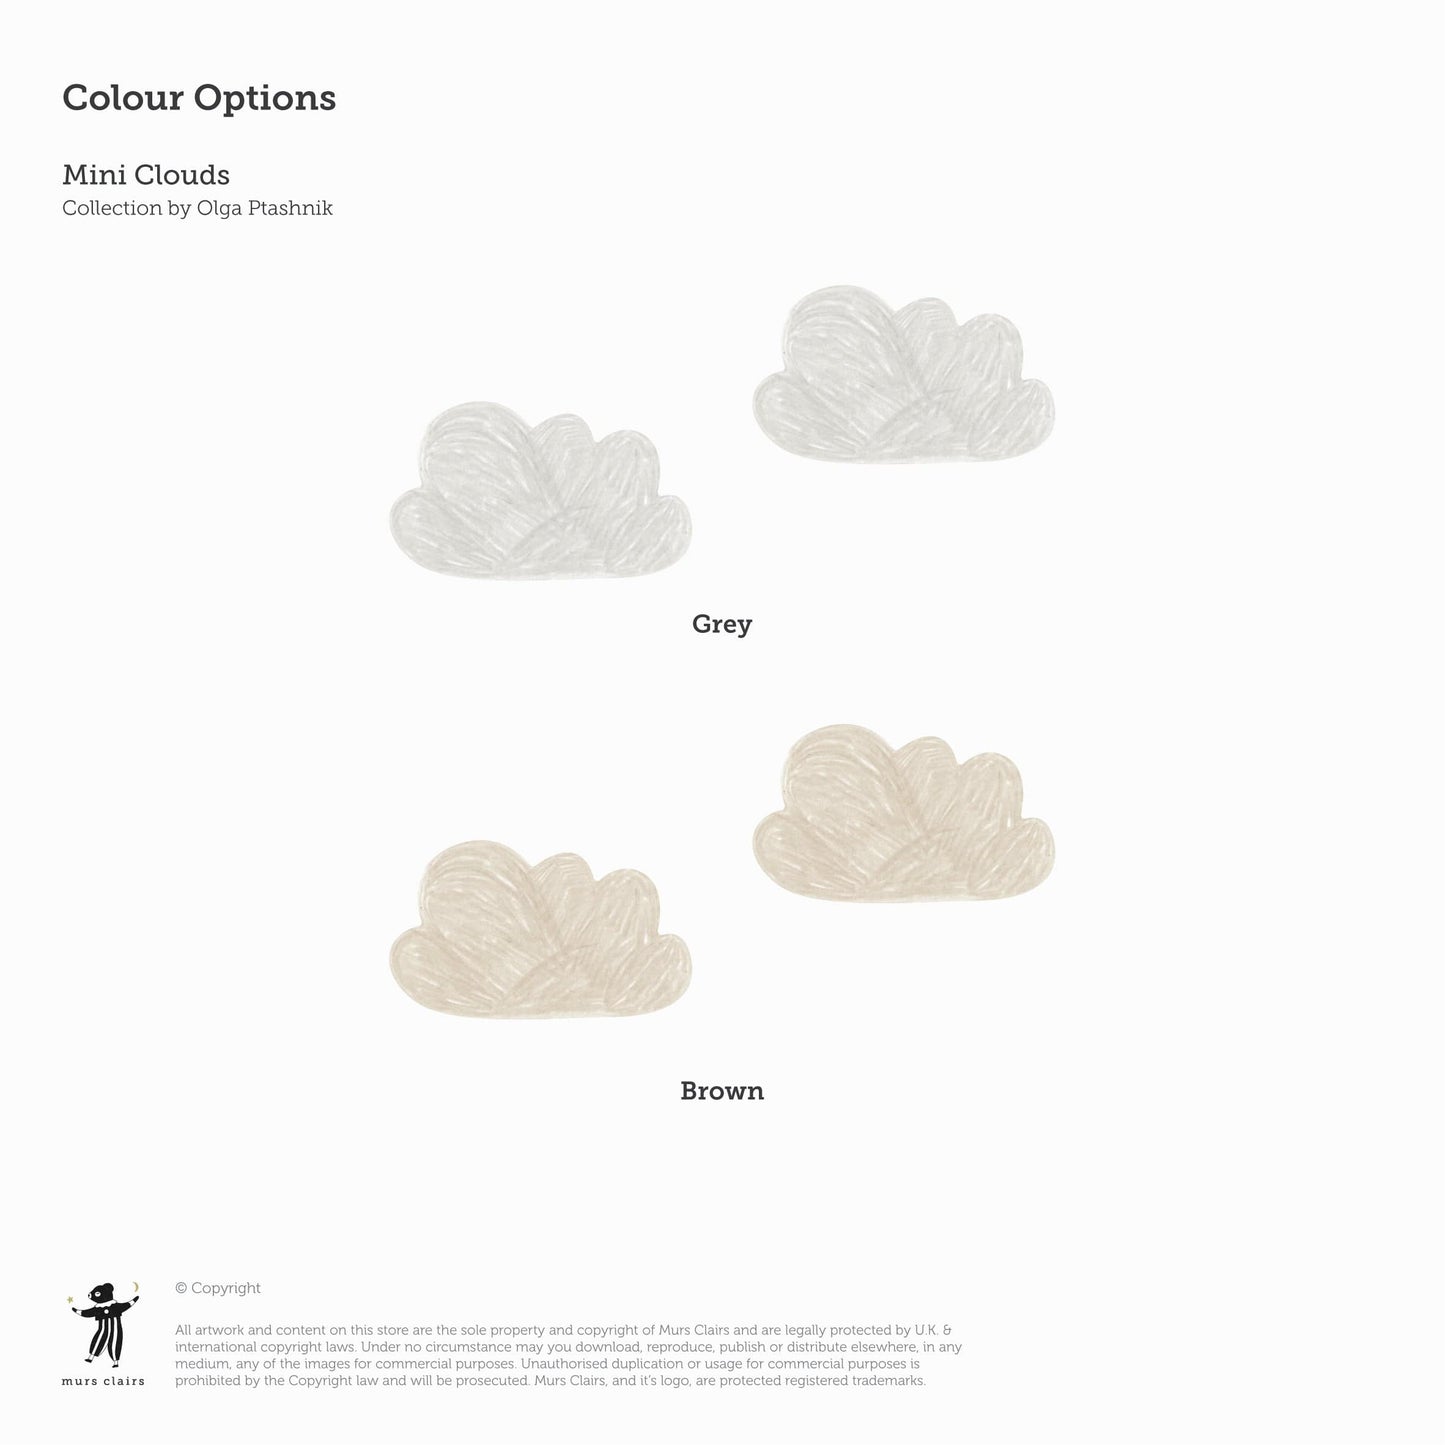 Image showing 2 of each colour cloud, grey at the top, brown at the bottom